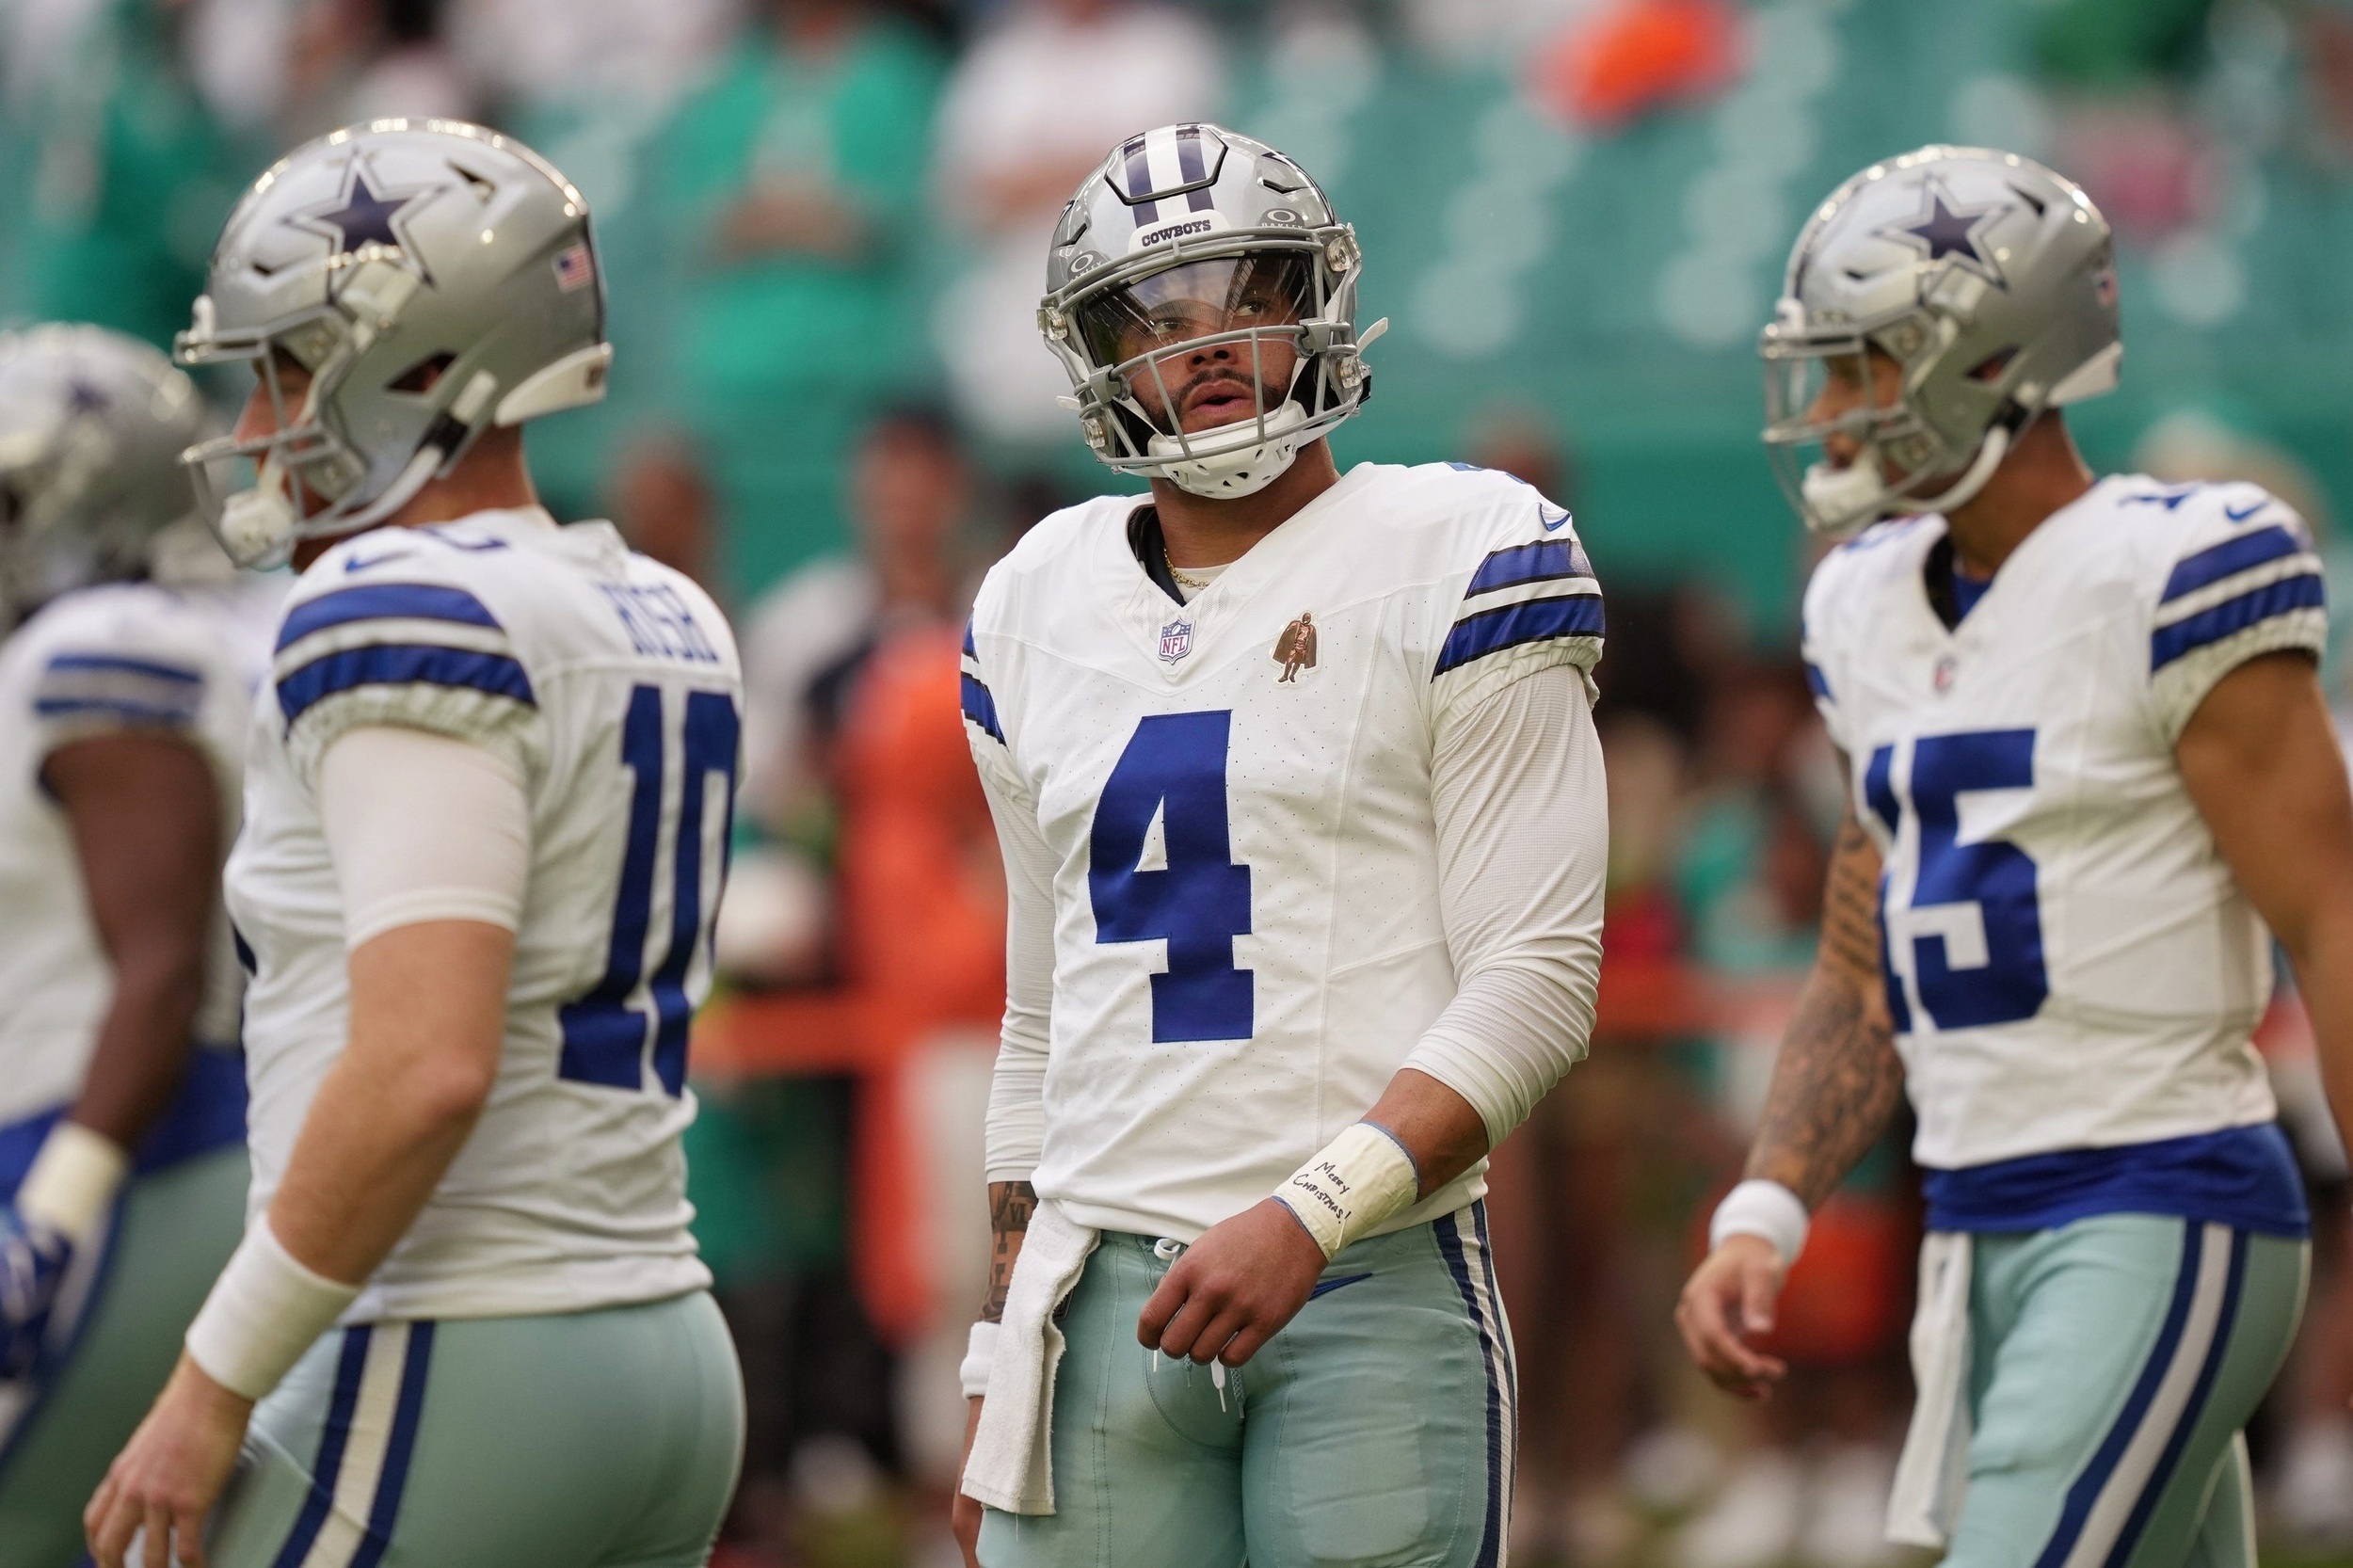 dak’s contract negotiations are holding the cowboys hostage